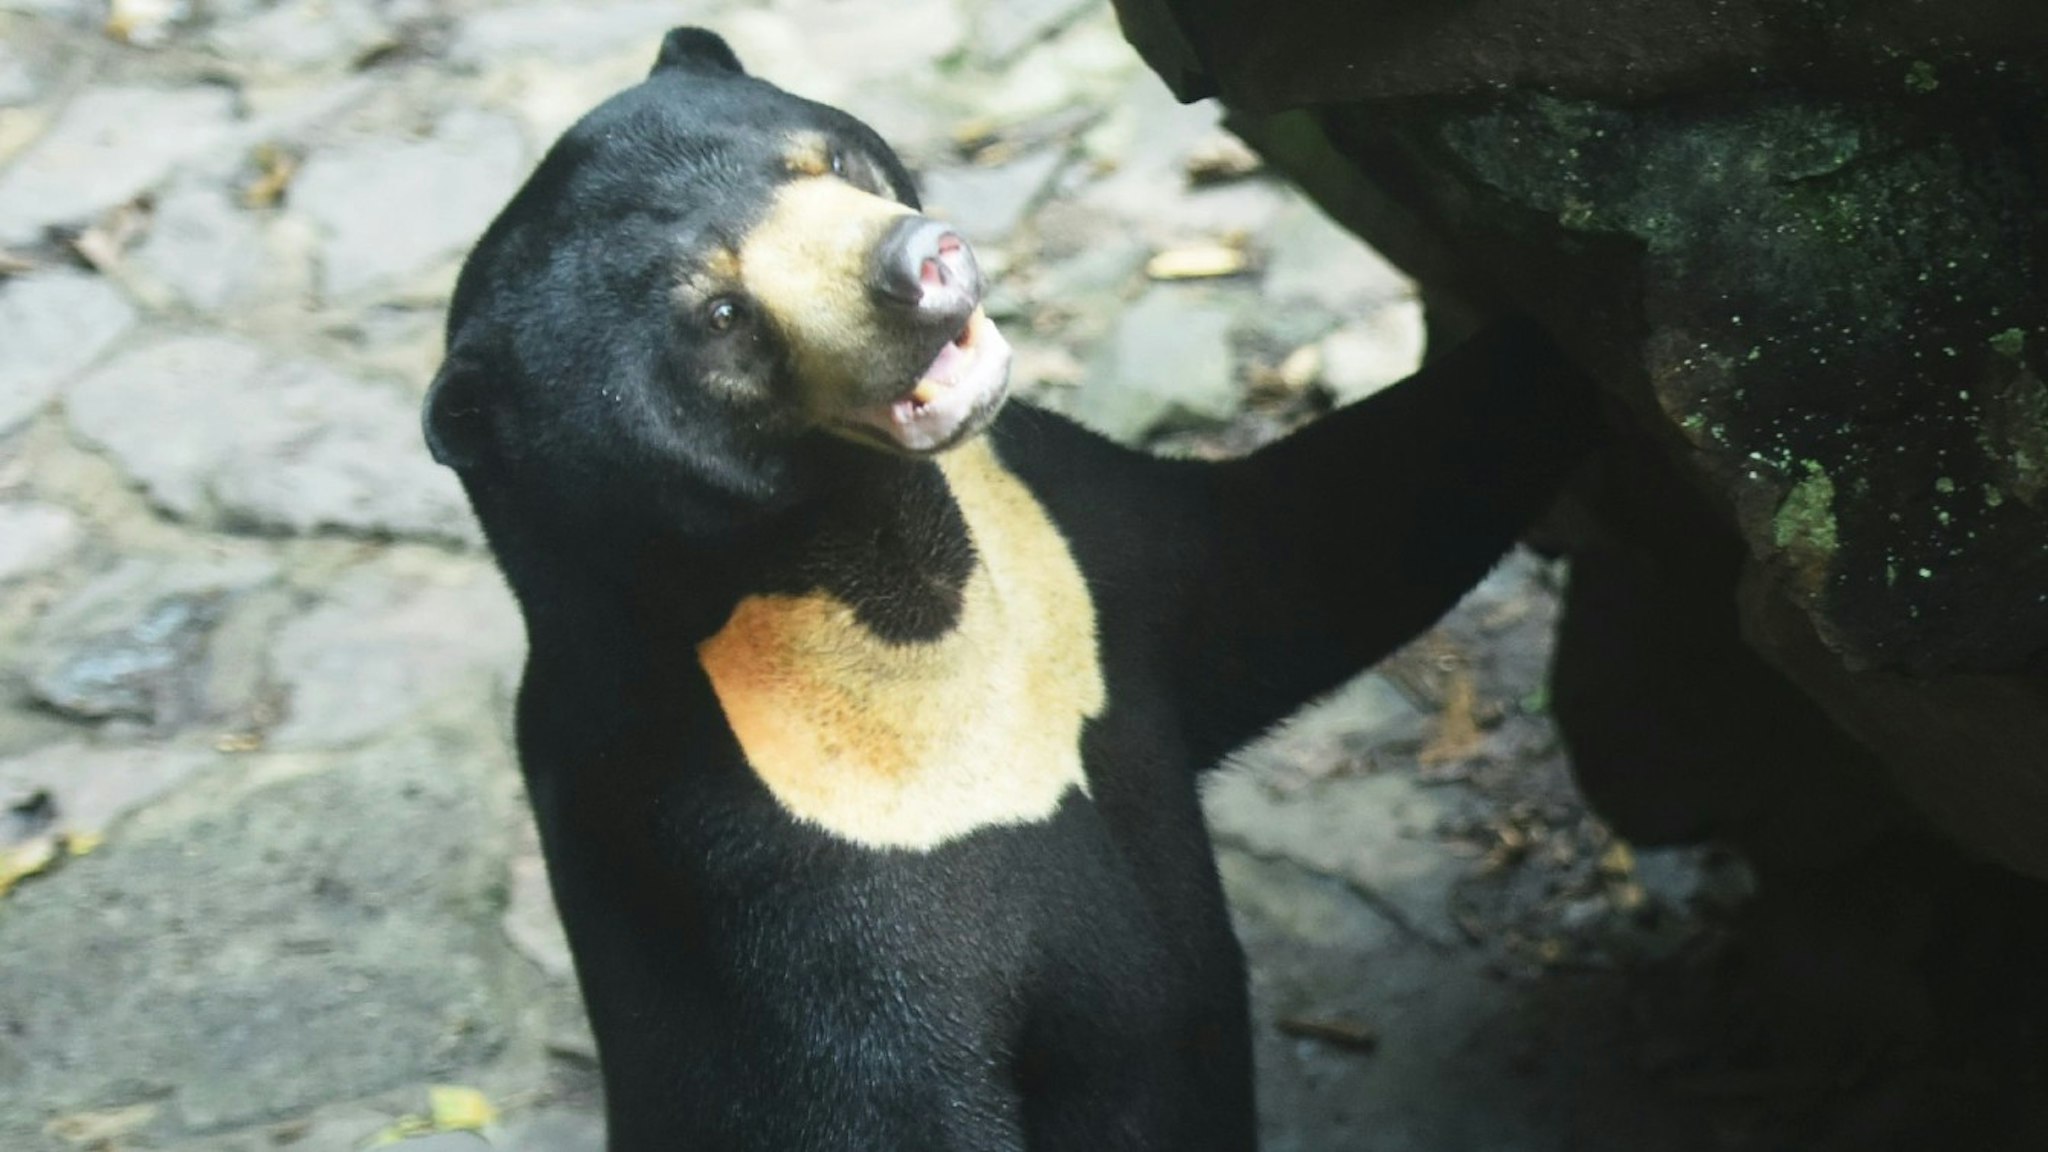 Two sun bears play in their compound at a zoo in Hangzhou in east China's Zhejiang province. The zoo has to reassure visitors its sun bears are genuine rather than humans in disguise, after video of one bear standing upright like a human sent rumors flying online.